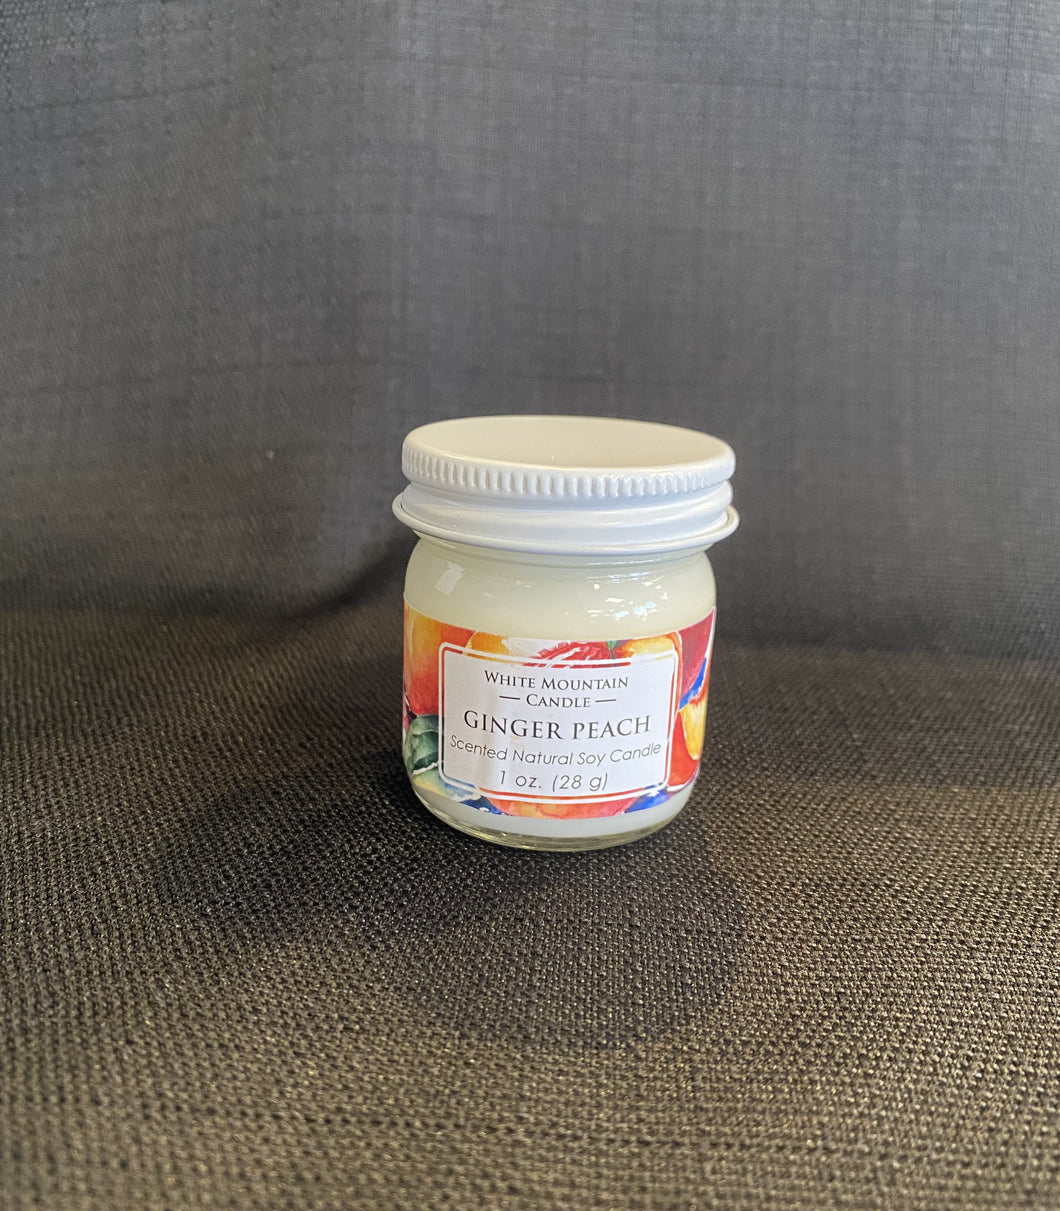 Ginger Peach 1 oz Candle